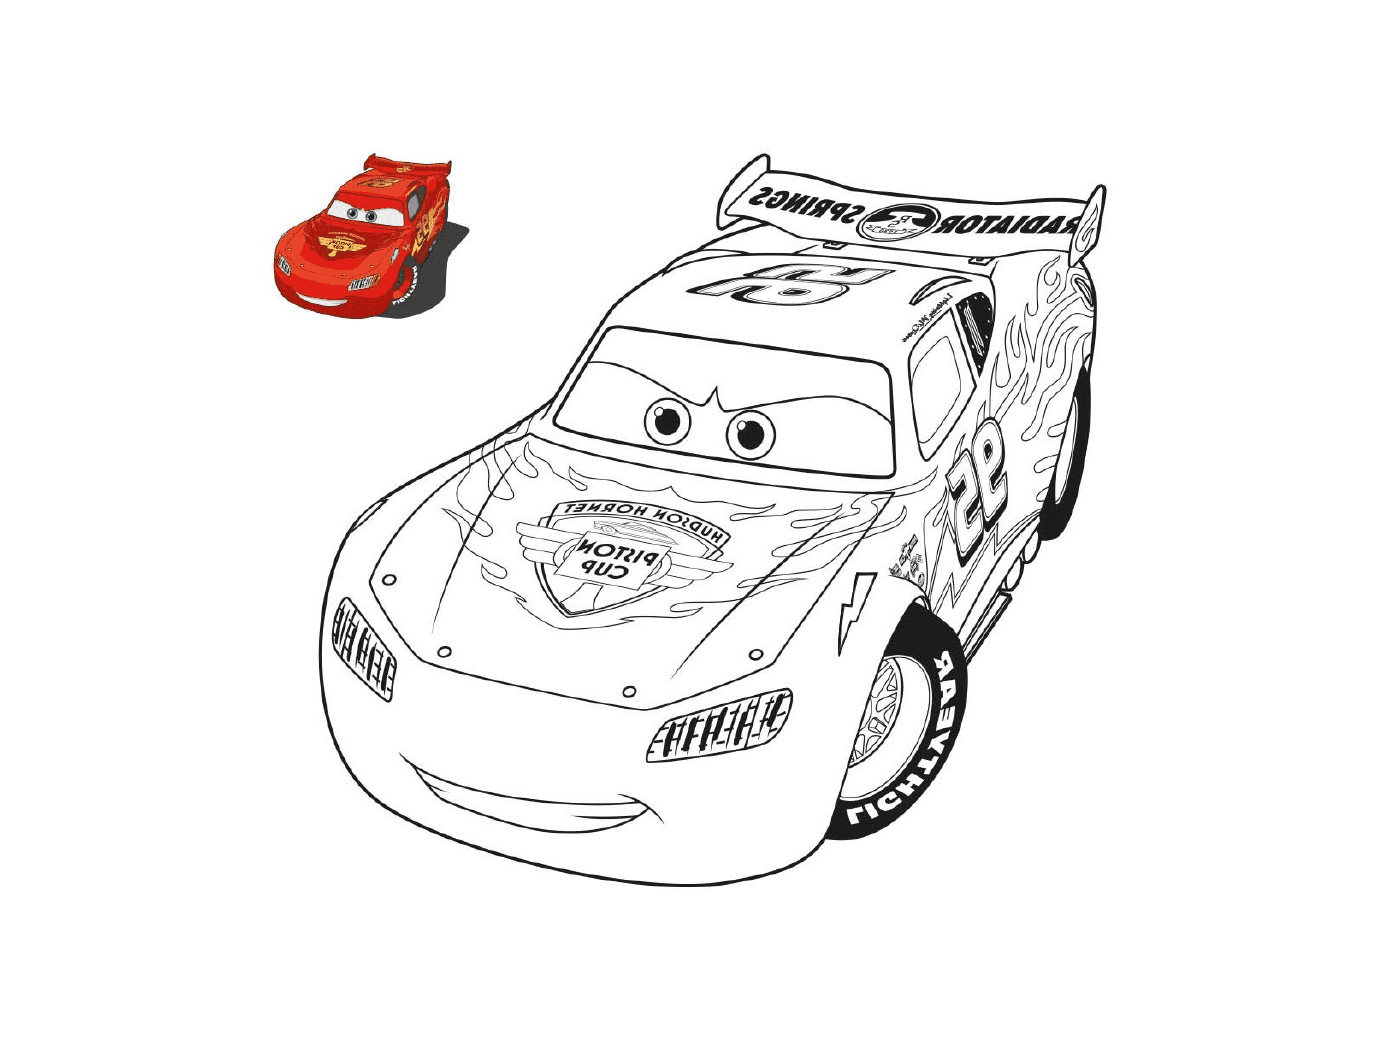  Cars 3 with coloring, a racing car and a toy car 